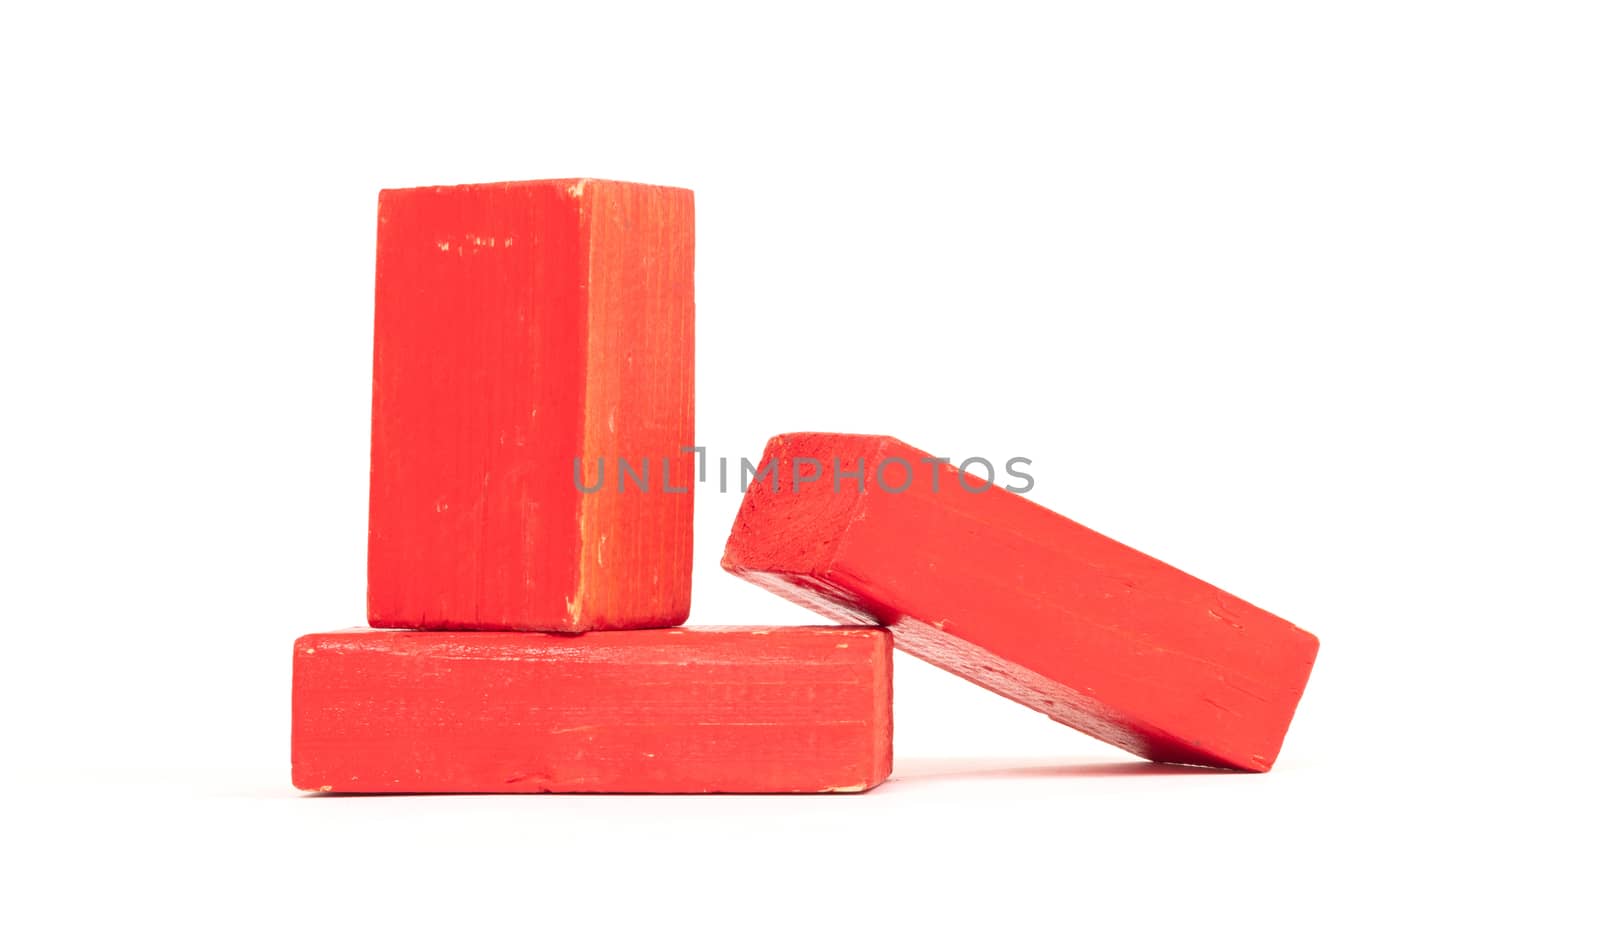 Vintage red building blocks isolated on white background